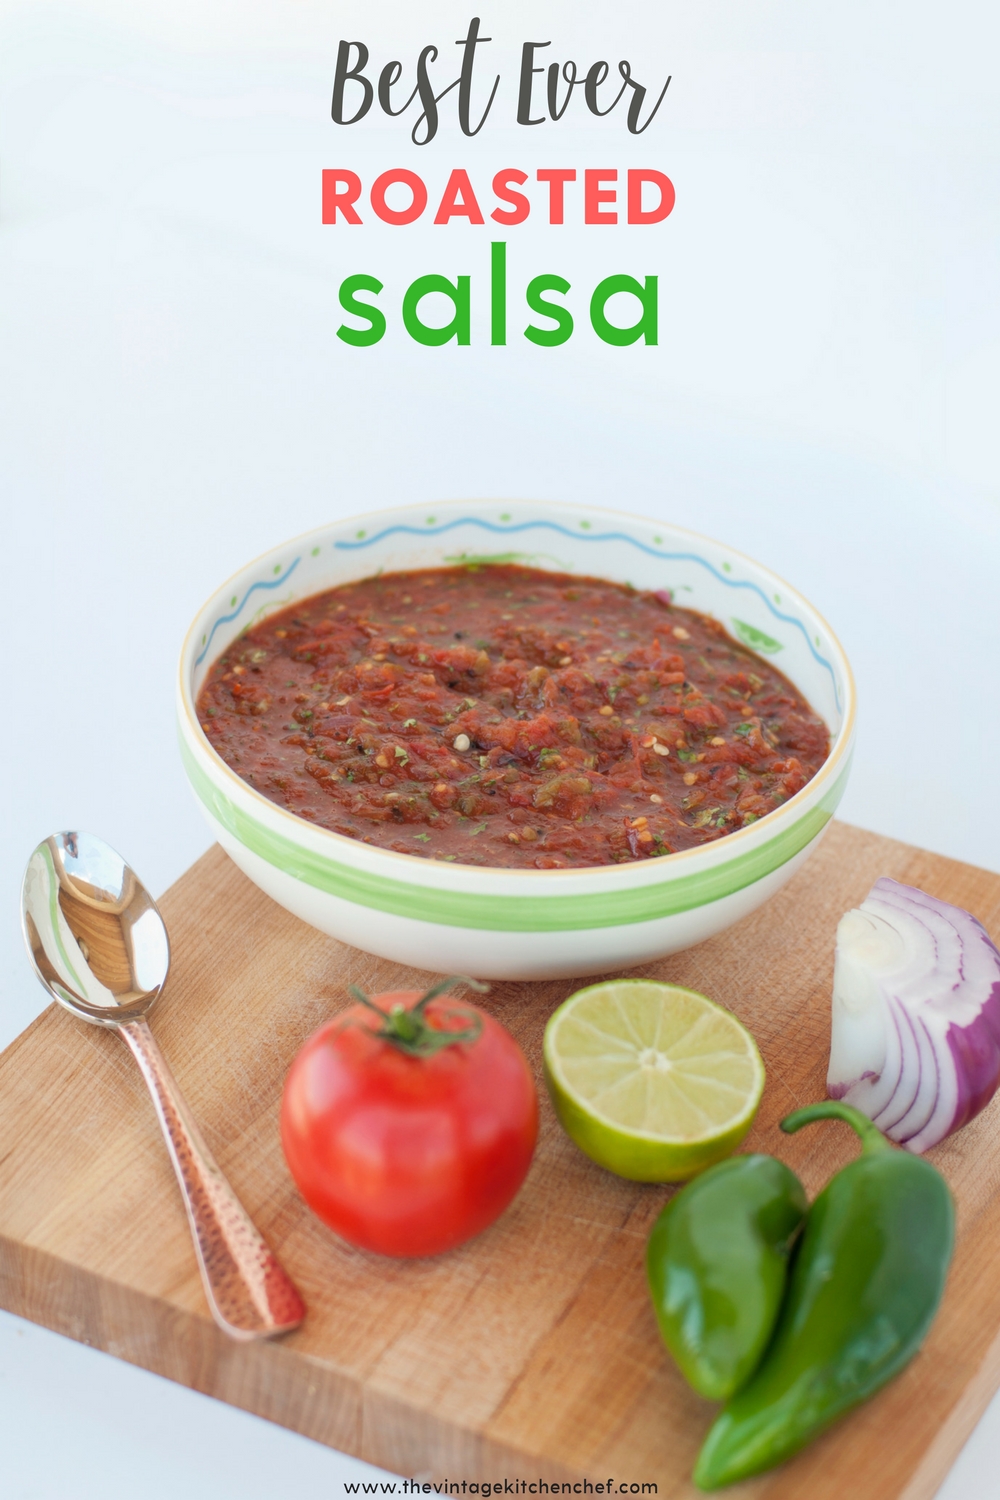 Fresh, flavorful and simple ingredients are roasted and blended together to make the absolute best salsa ever! Hot or mild, it's delicious either way! 